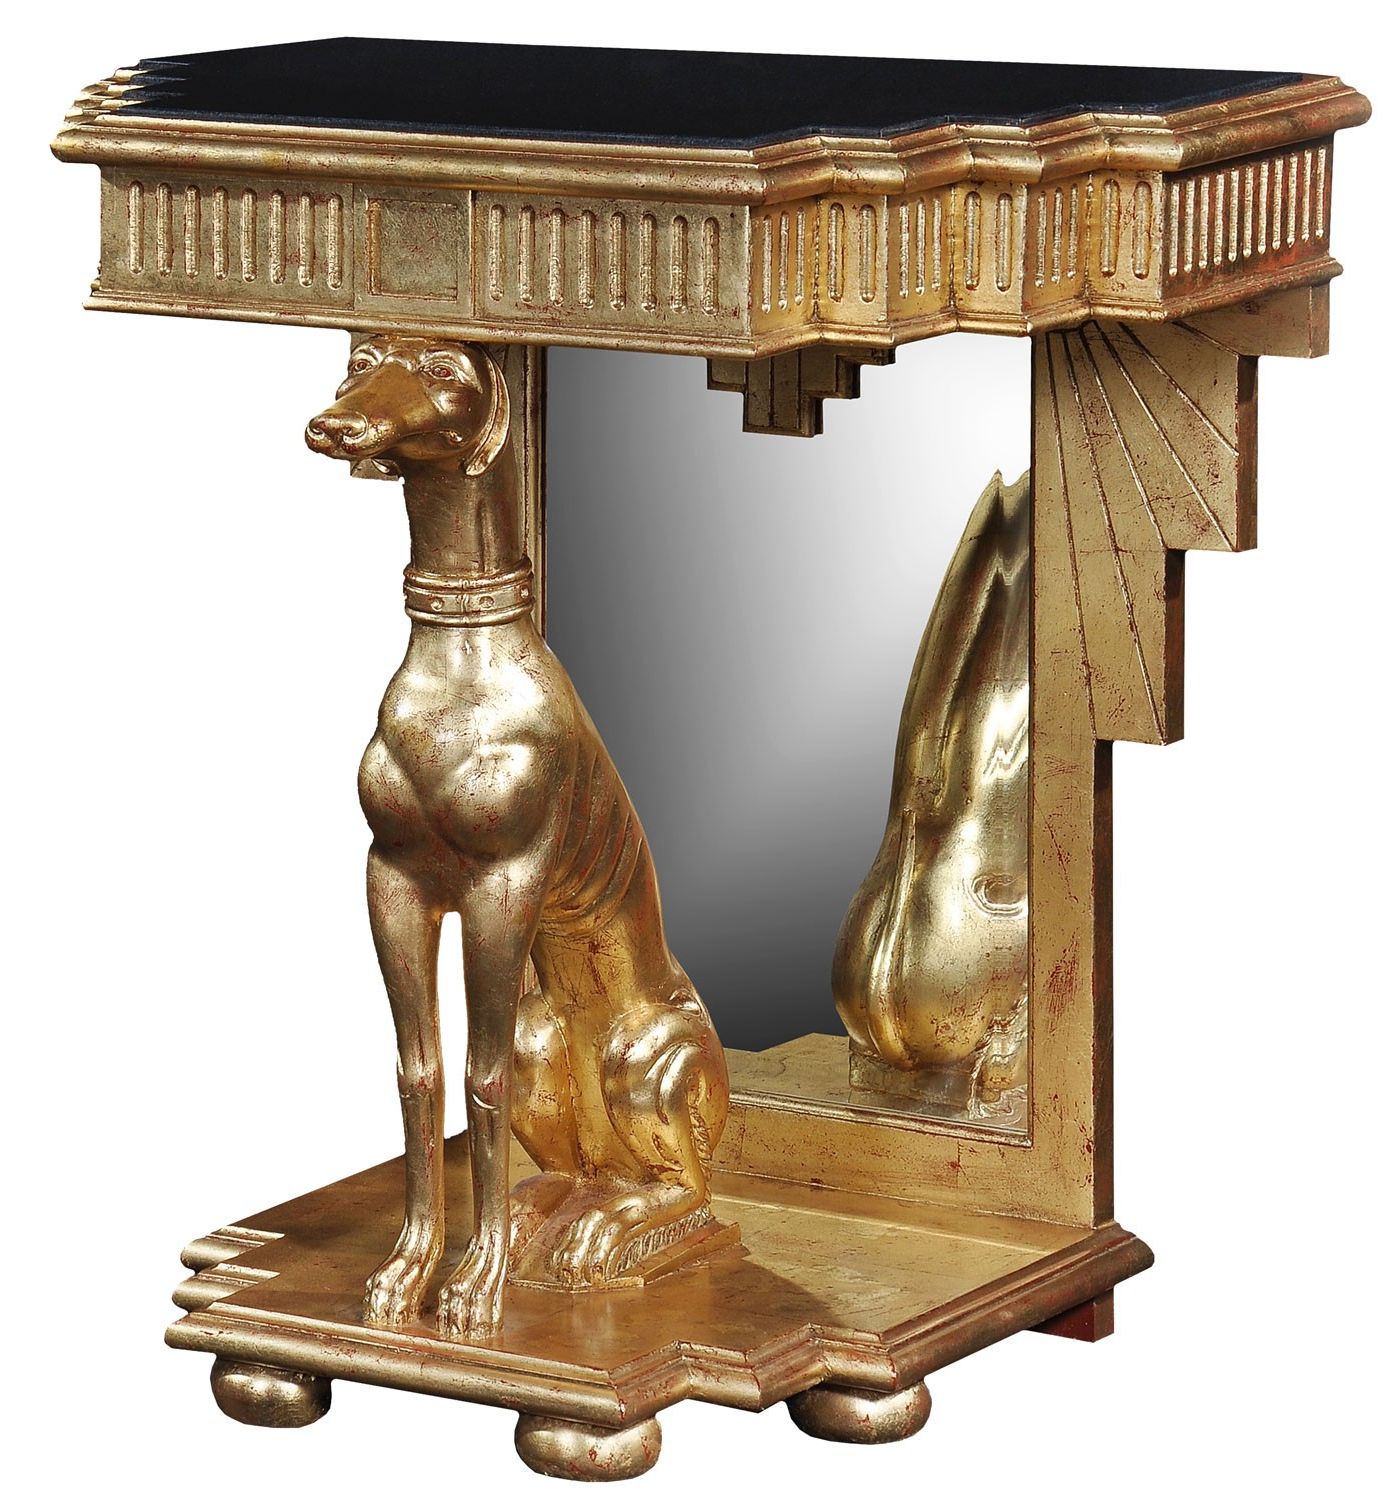 Popular Gold Leaf Console Table – Antique Finish, Console / Hall Intended For Antique Gold Aluminum Console Tables (View 9 of 10)